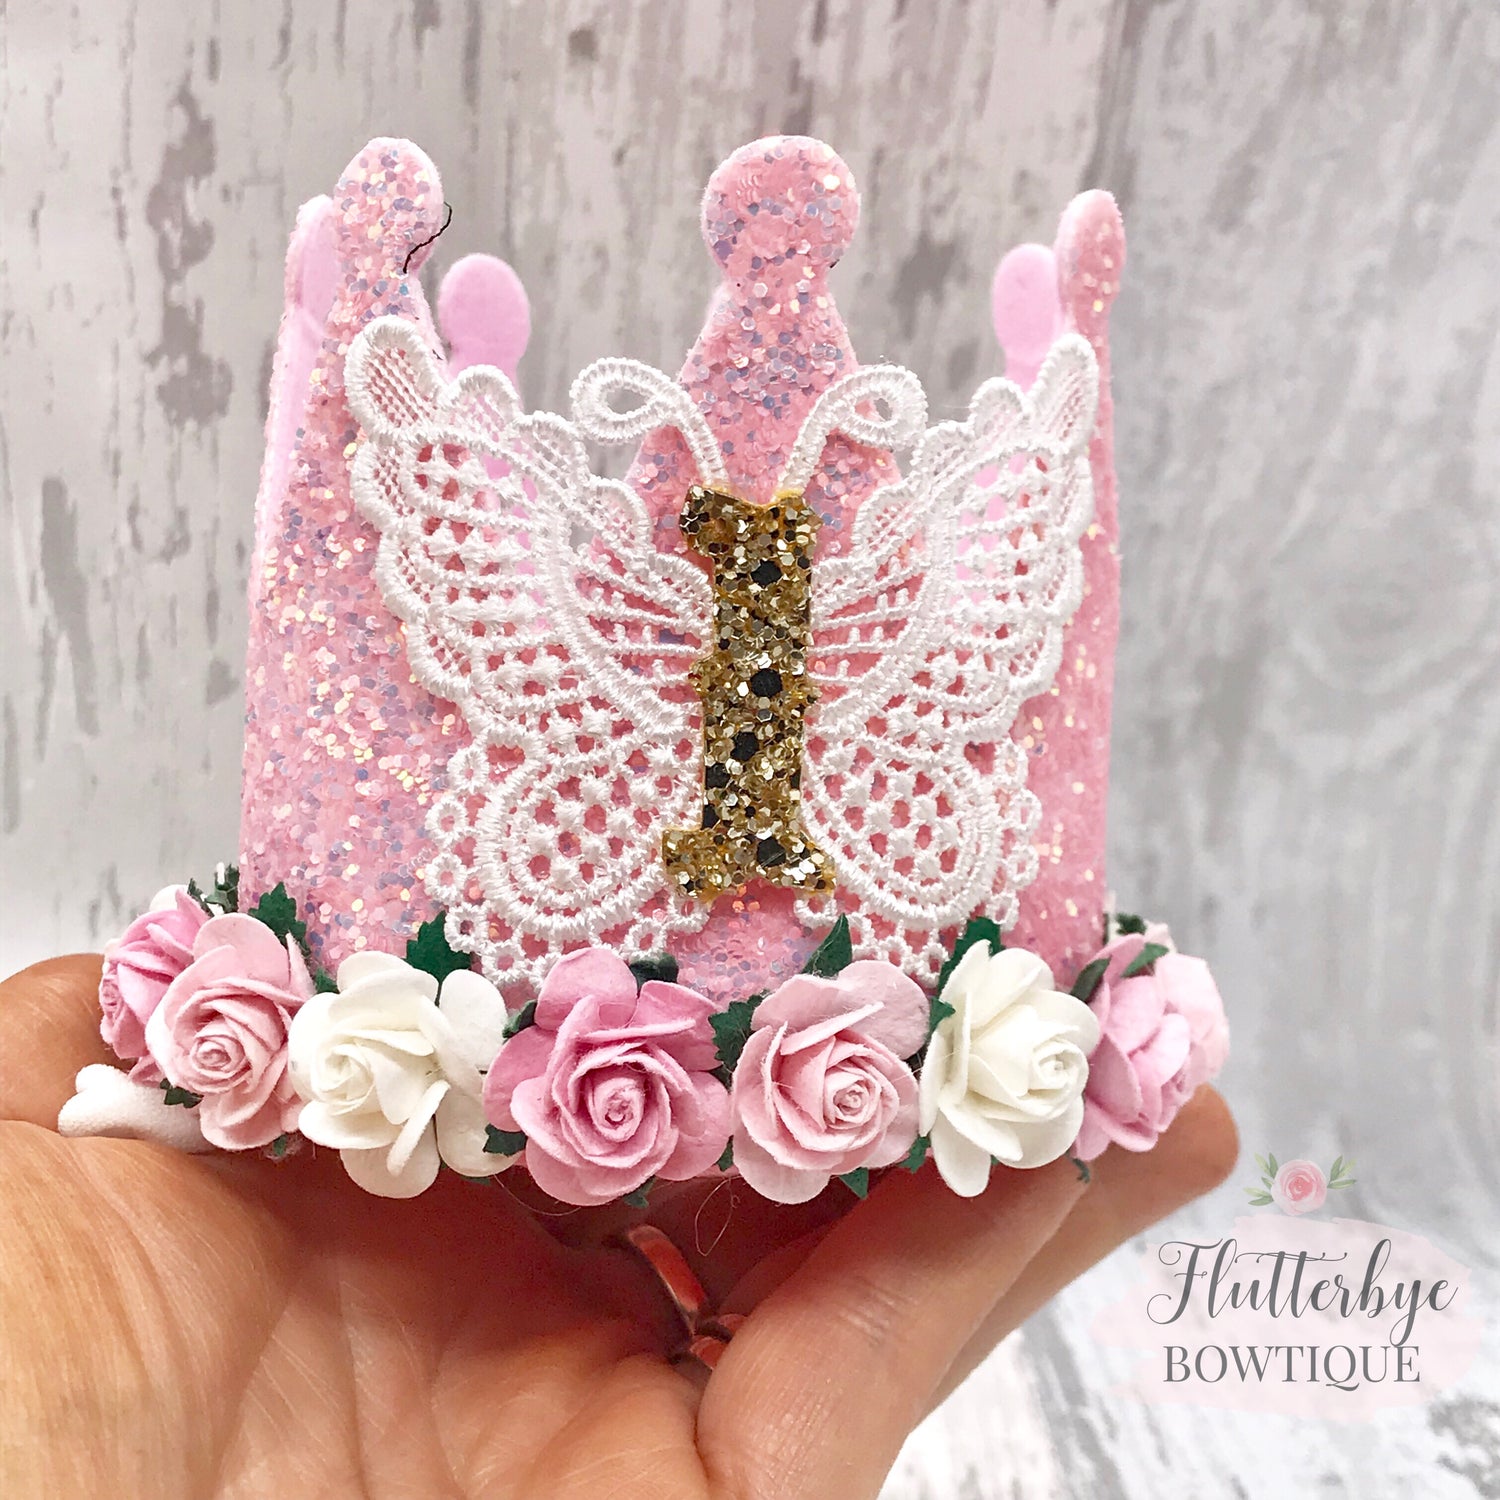 Lace Butterfly Birthday Crown,  Cake Smash Props - Flutterbye Bowtique